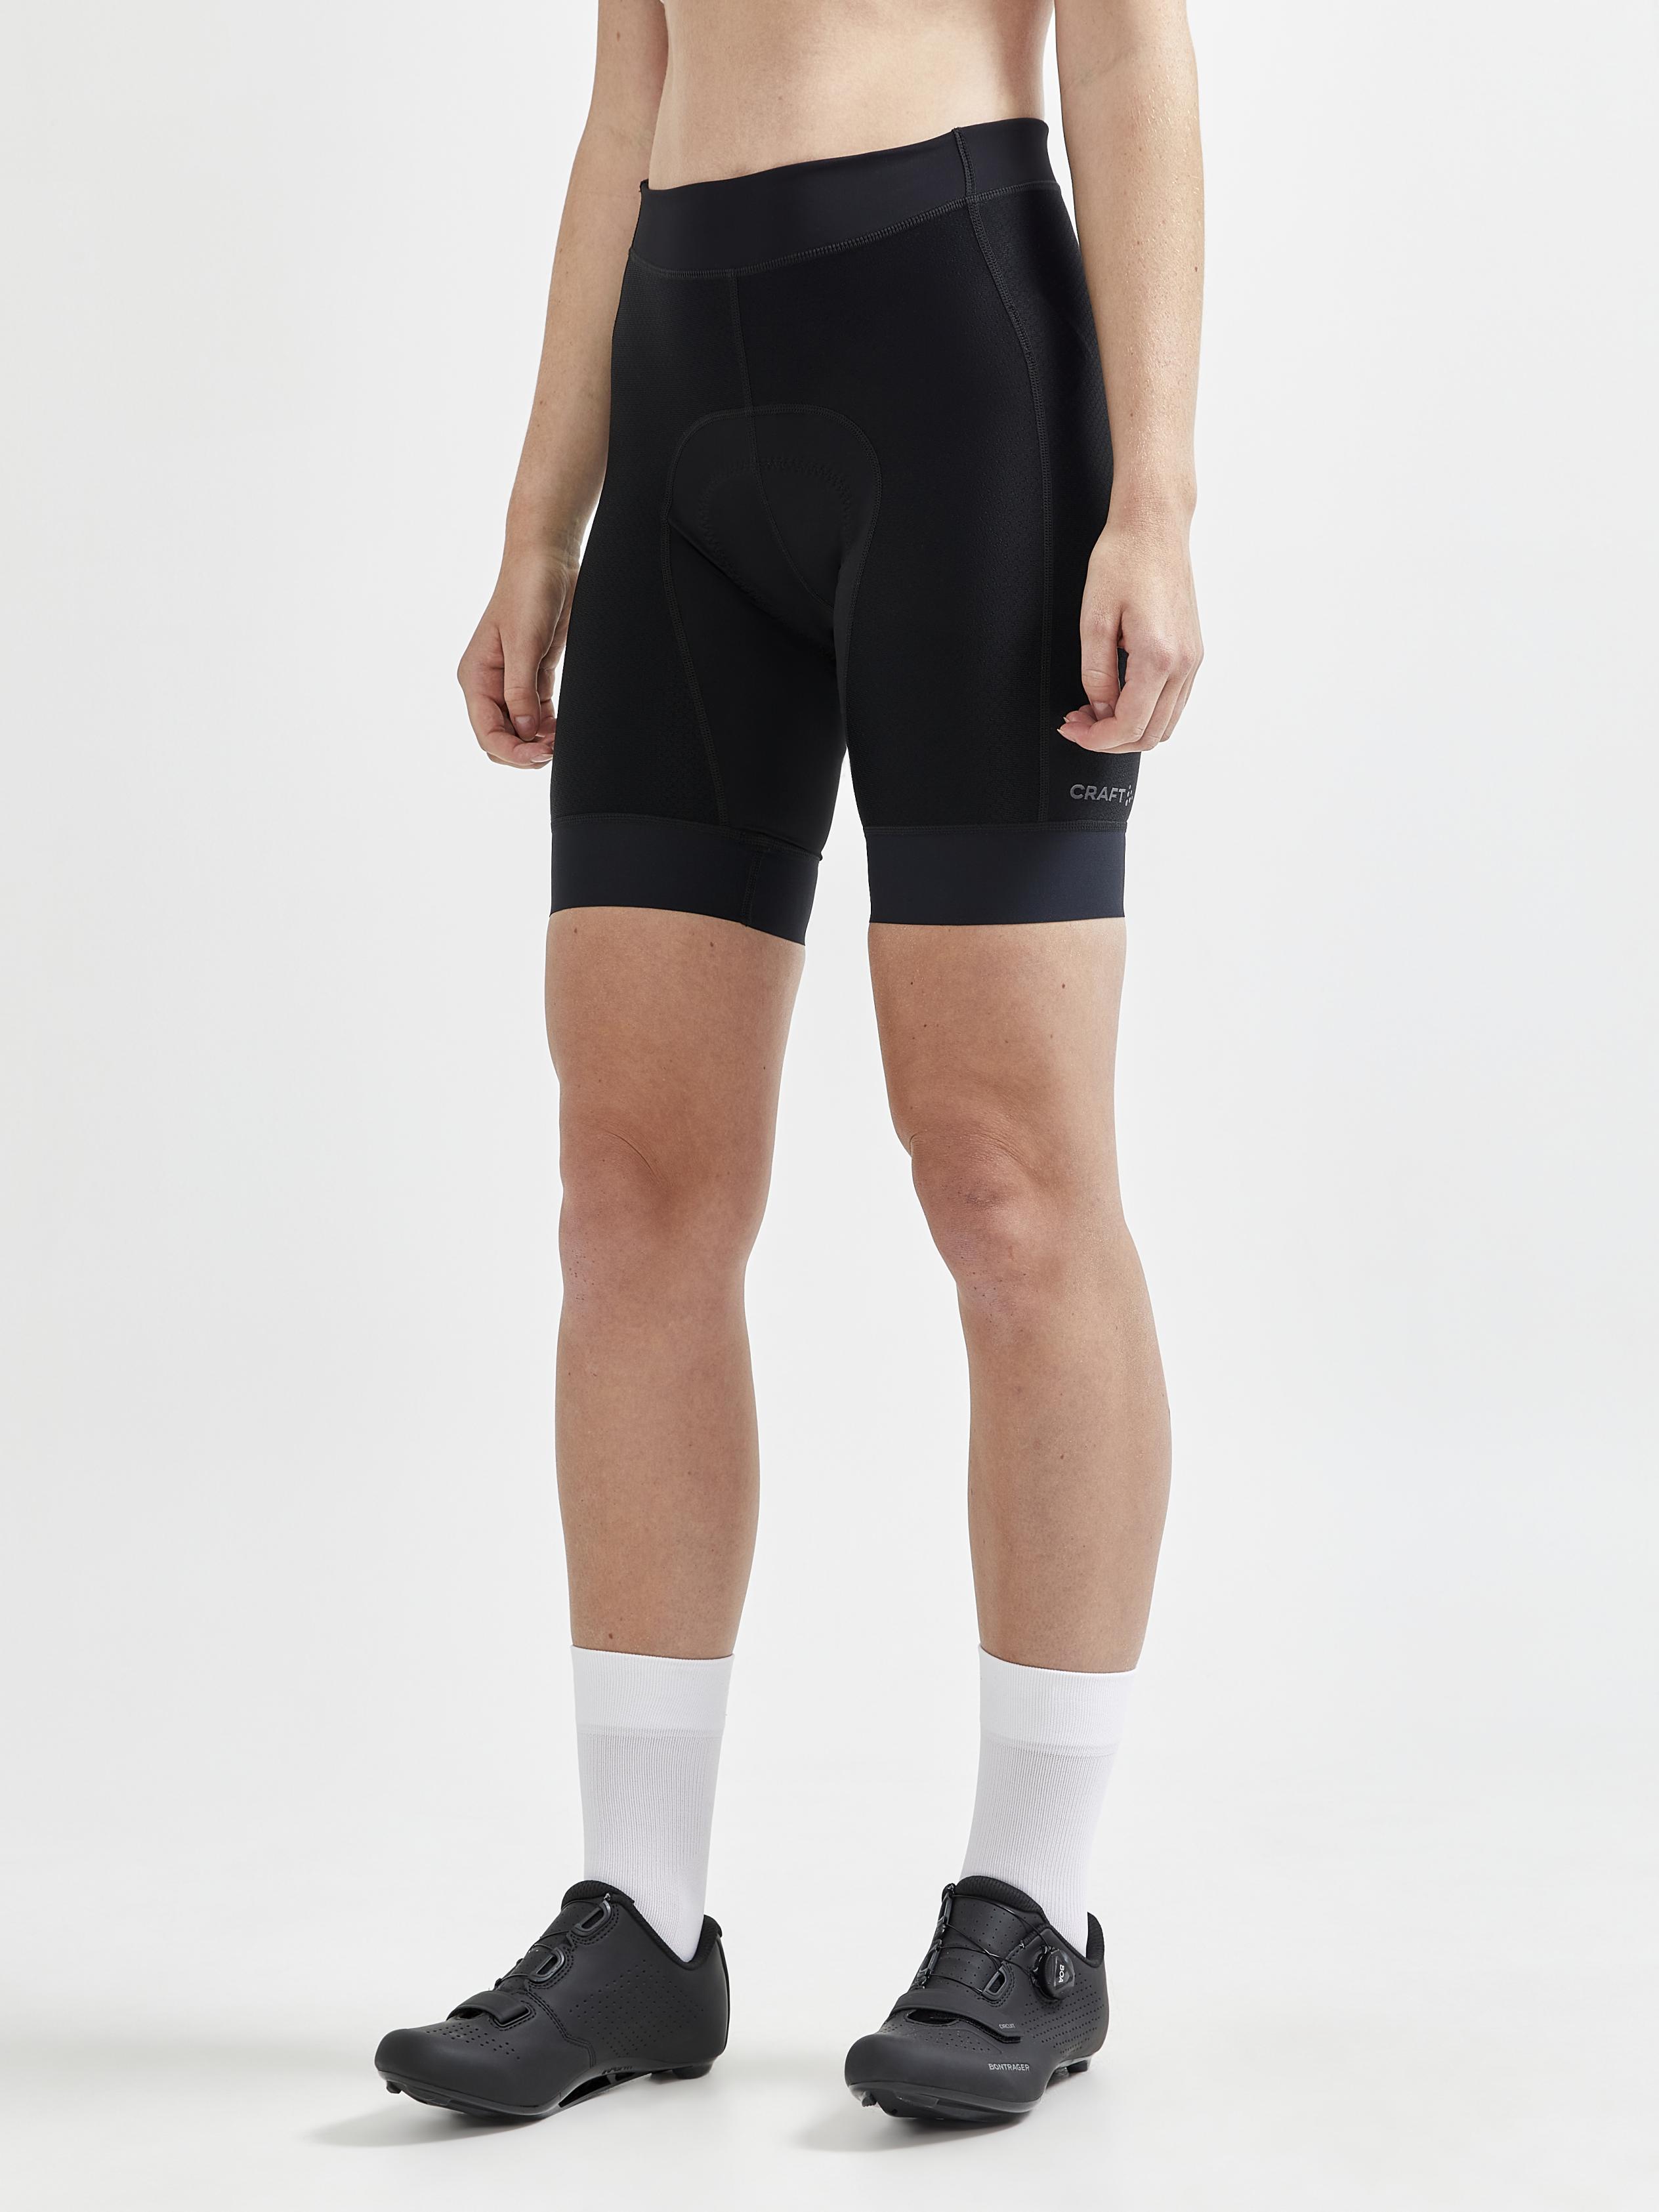 Adorna Shapparel Cycling Shorts for women with Thigh Shaping - Golden